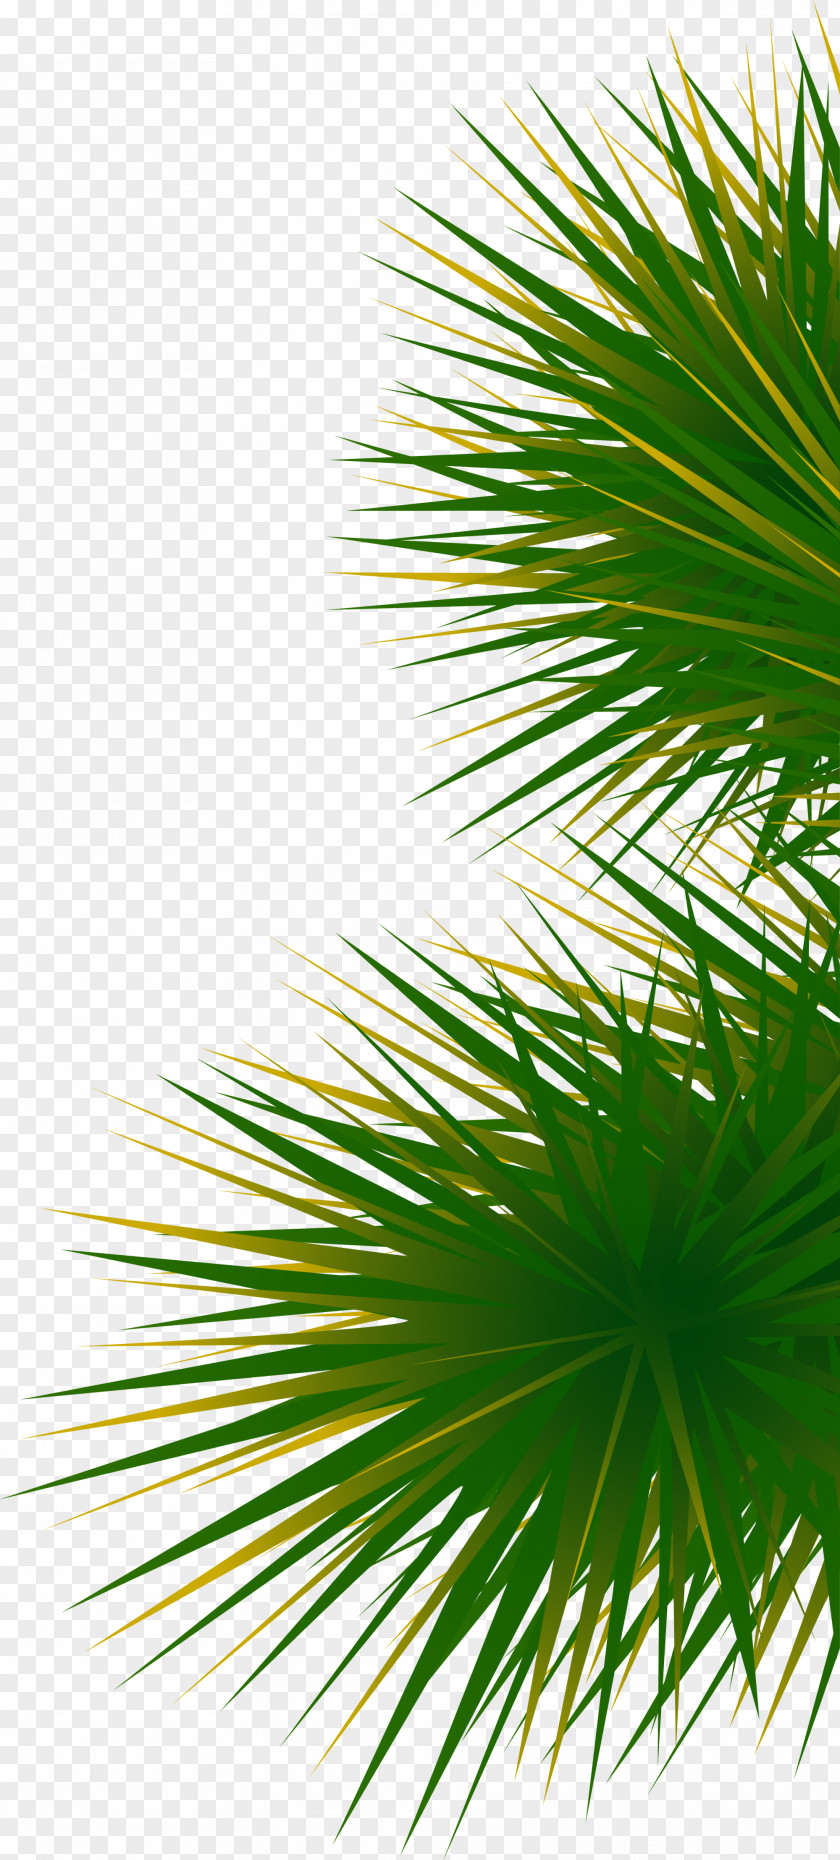 Green And Simple Grass PNG